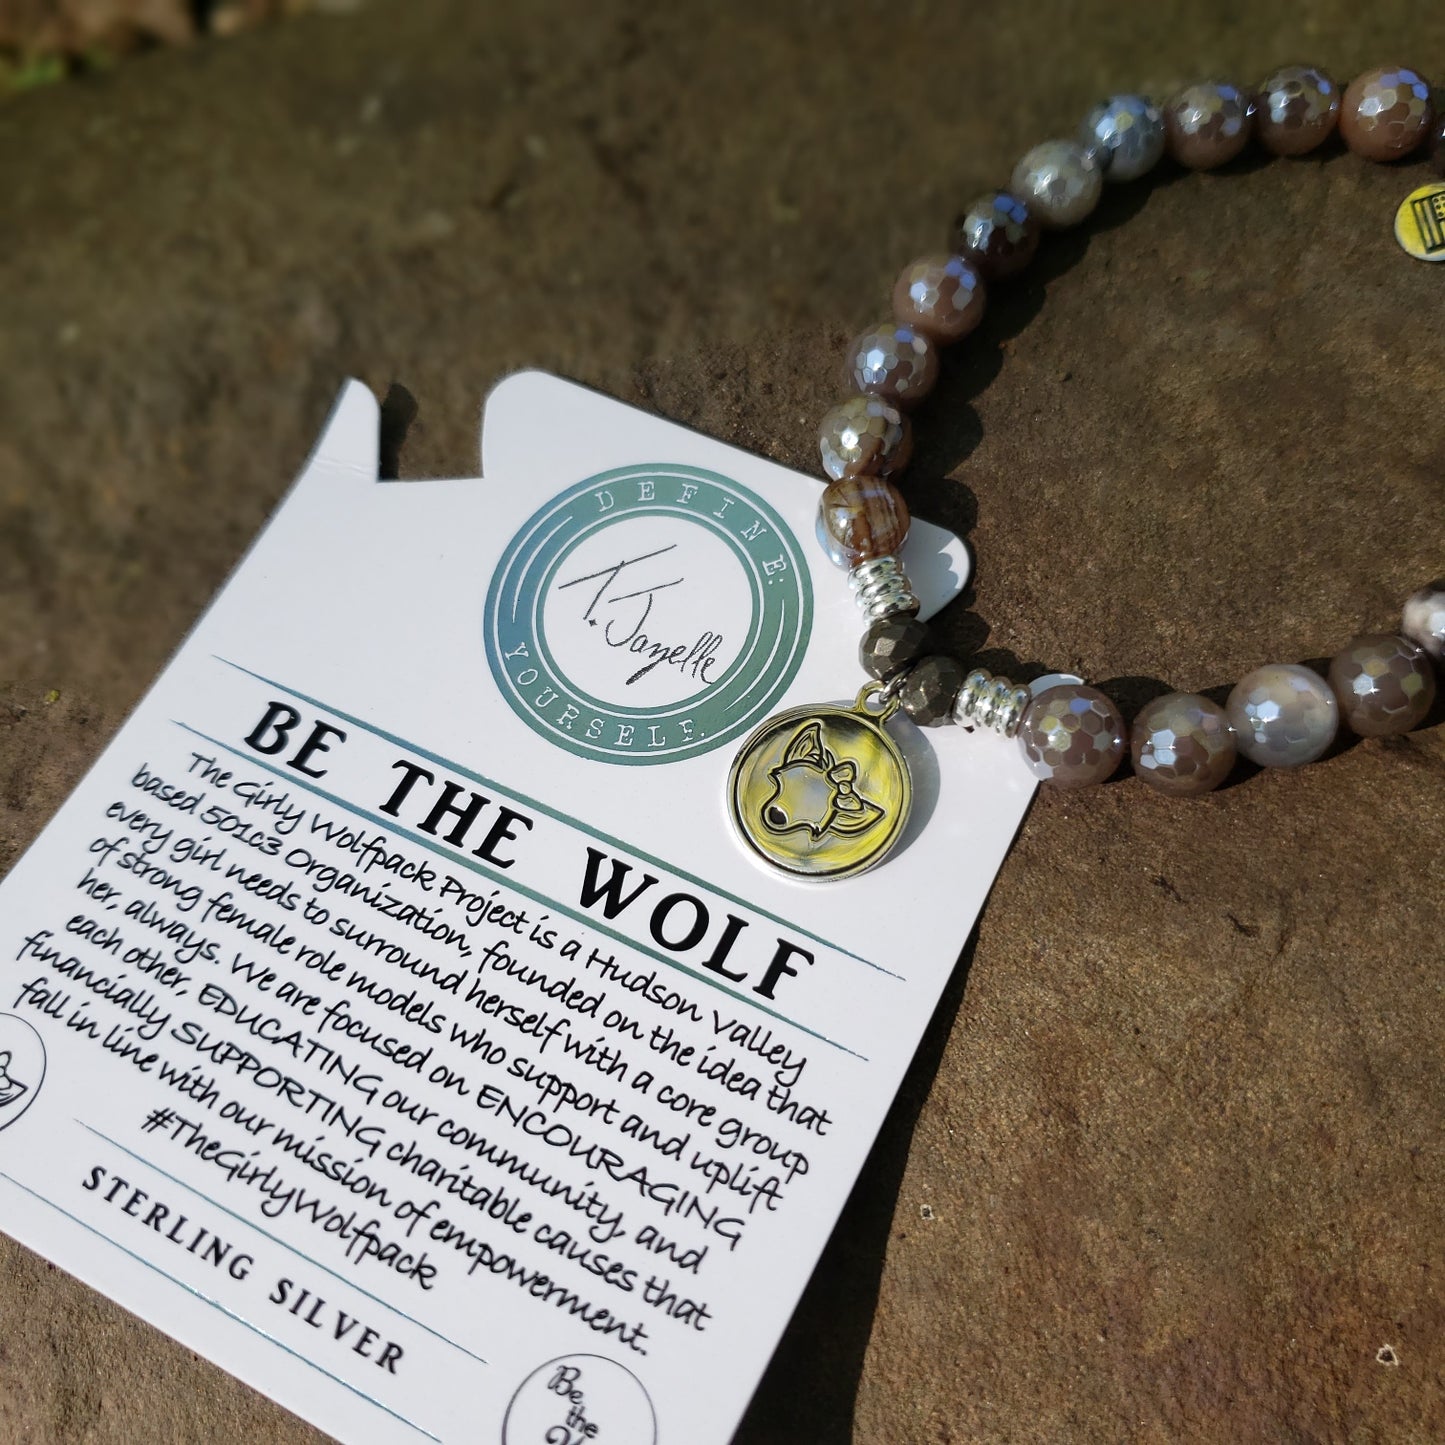 T. Jazelle "Be the Wolf" Bracelet Supporting the Girly Wolfpack